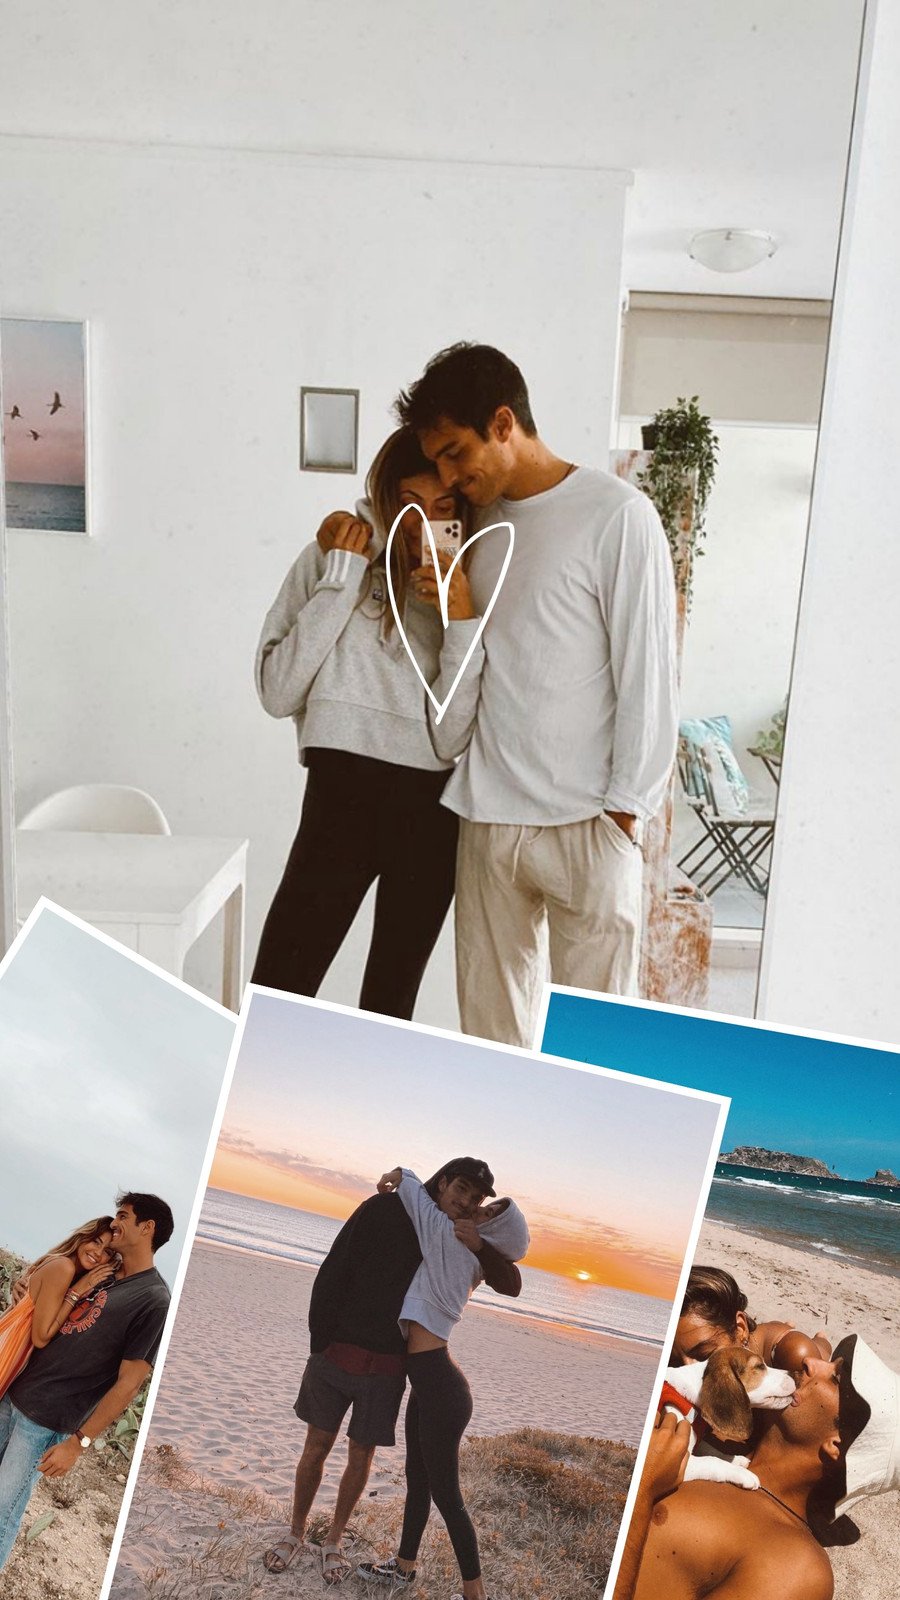 Best Couple Poses 😍 (@couple__poses) • Instagram photos and videos